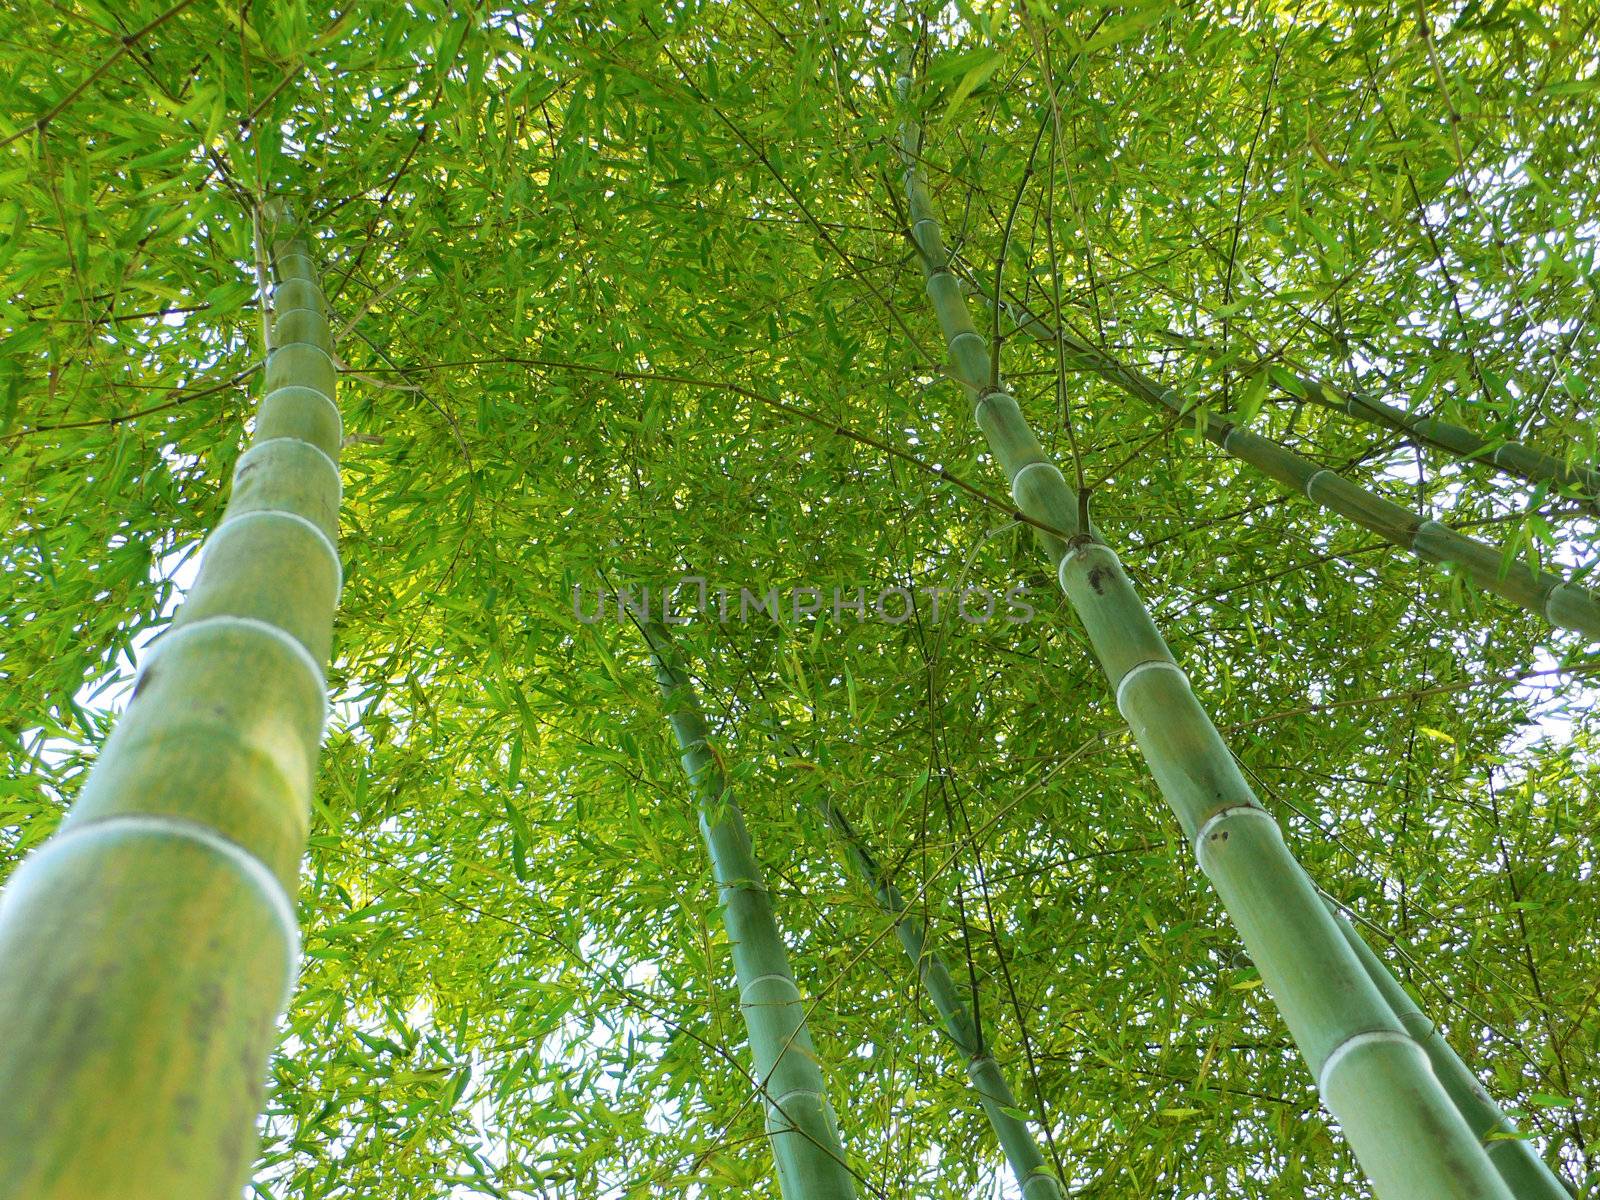 green bamboo trees grow up to blue sky